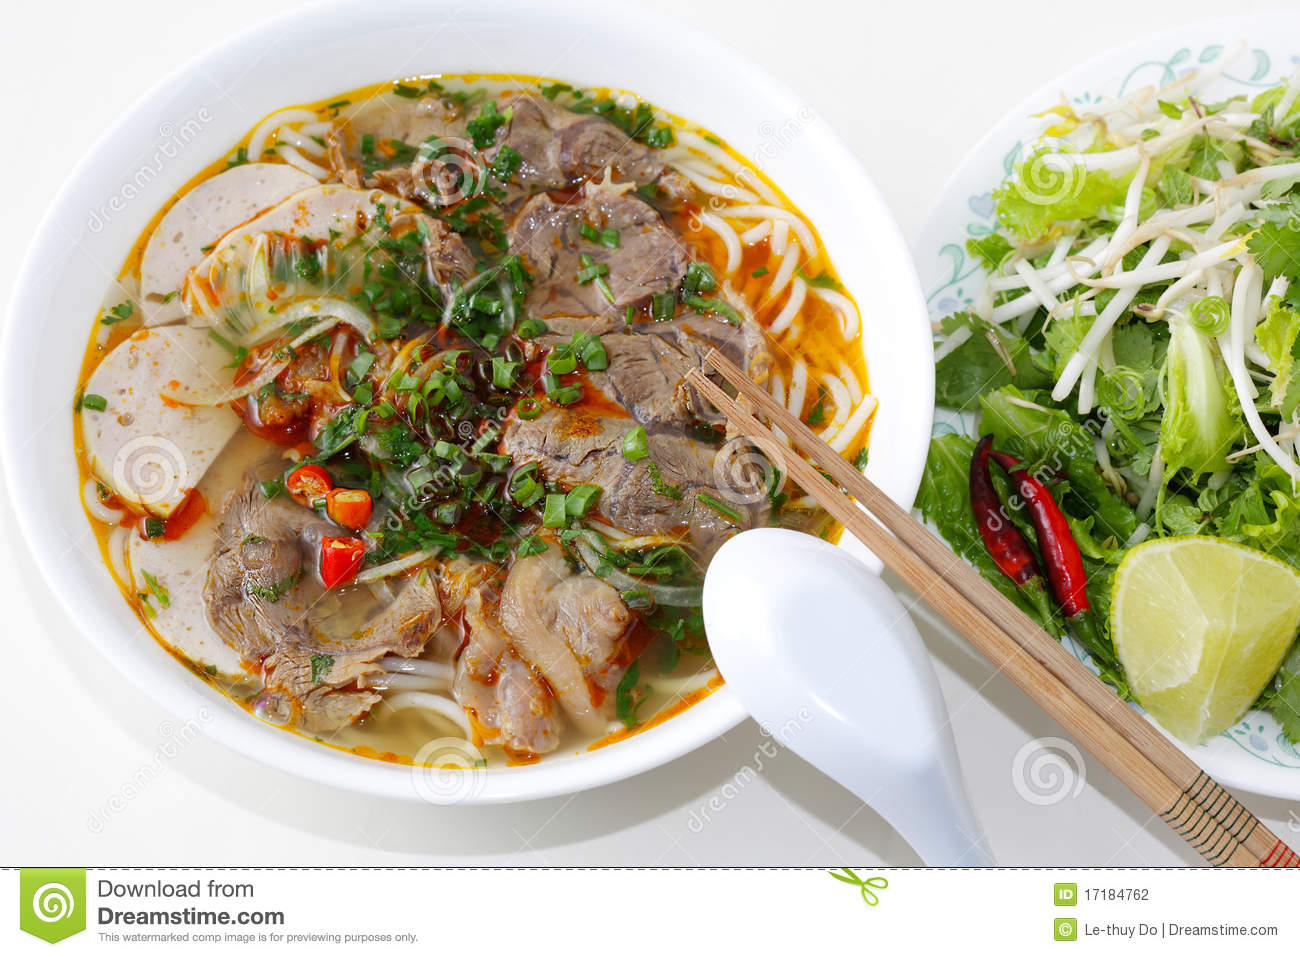 Beef Noodles In A Bowl Vietnamese Food Very Spicy 